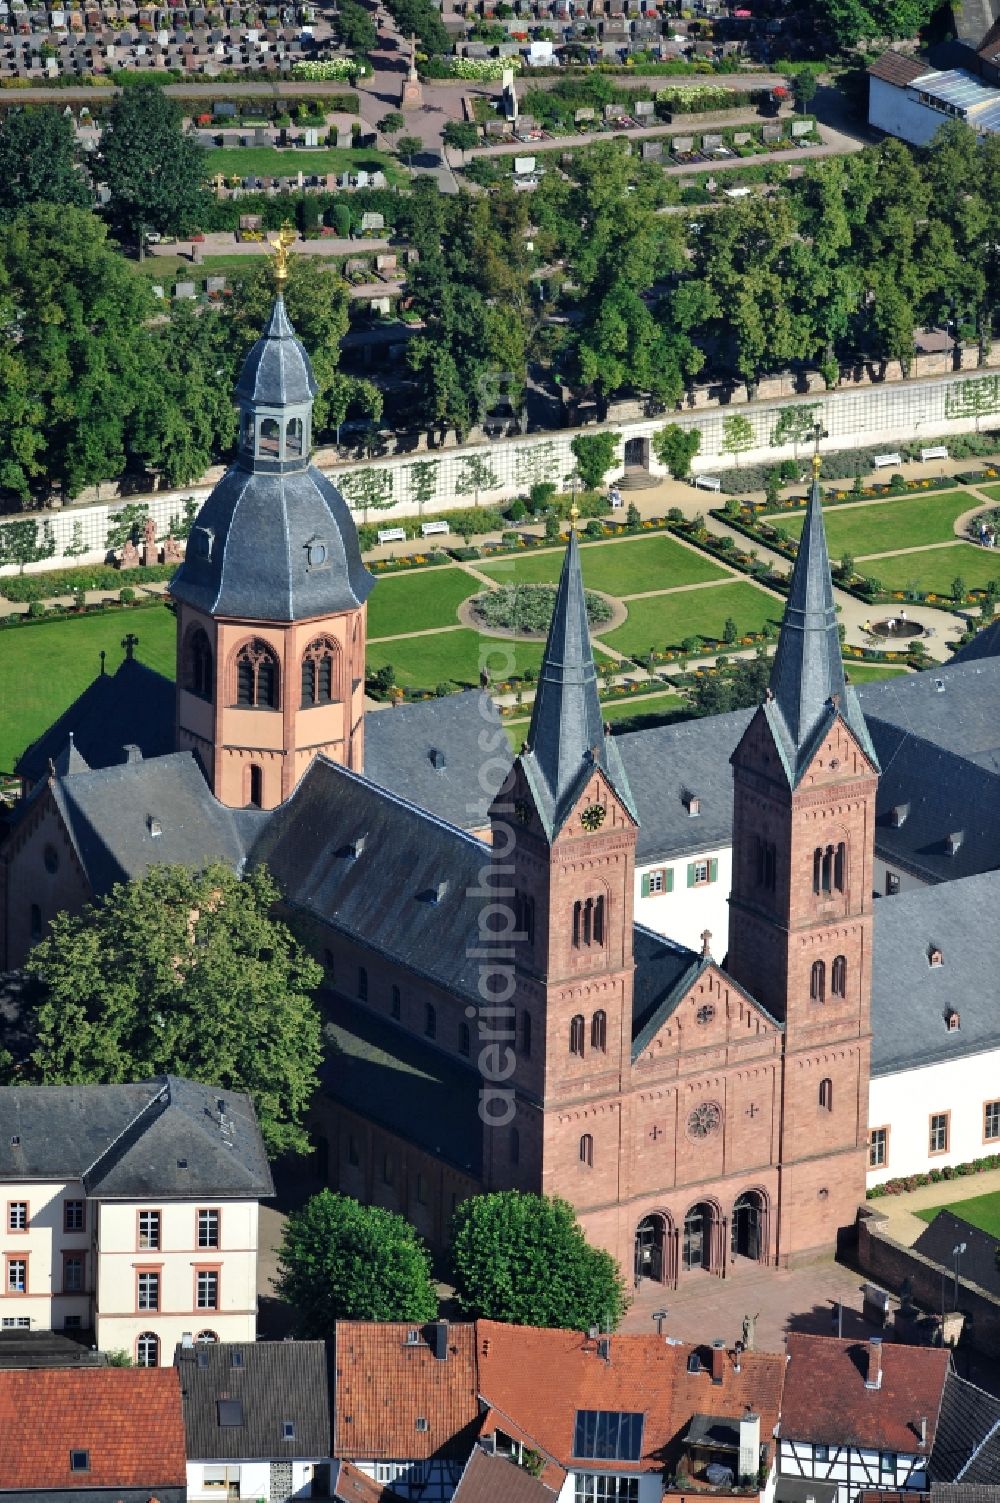 Aerial image Seligenstadt - View of the Basilica of St. Marcellinus and Peter in Seligenstadt in Hesse. It is the remains of a monastery that was founded in 834, and has a garden. After secularization of the abbey in 1803, the Basilica became a catholic parish church in 1812